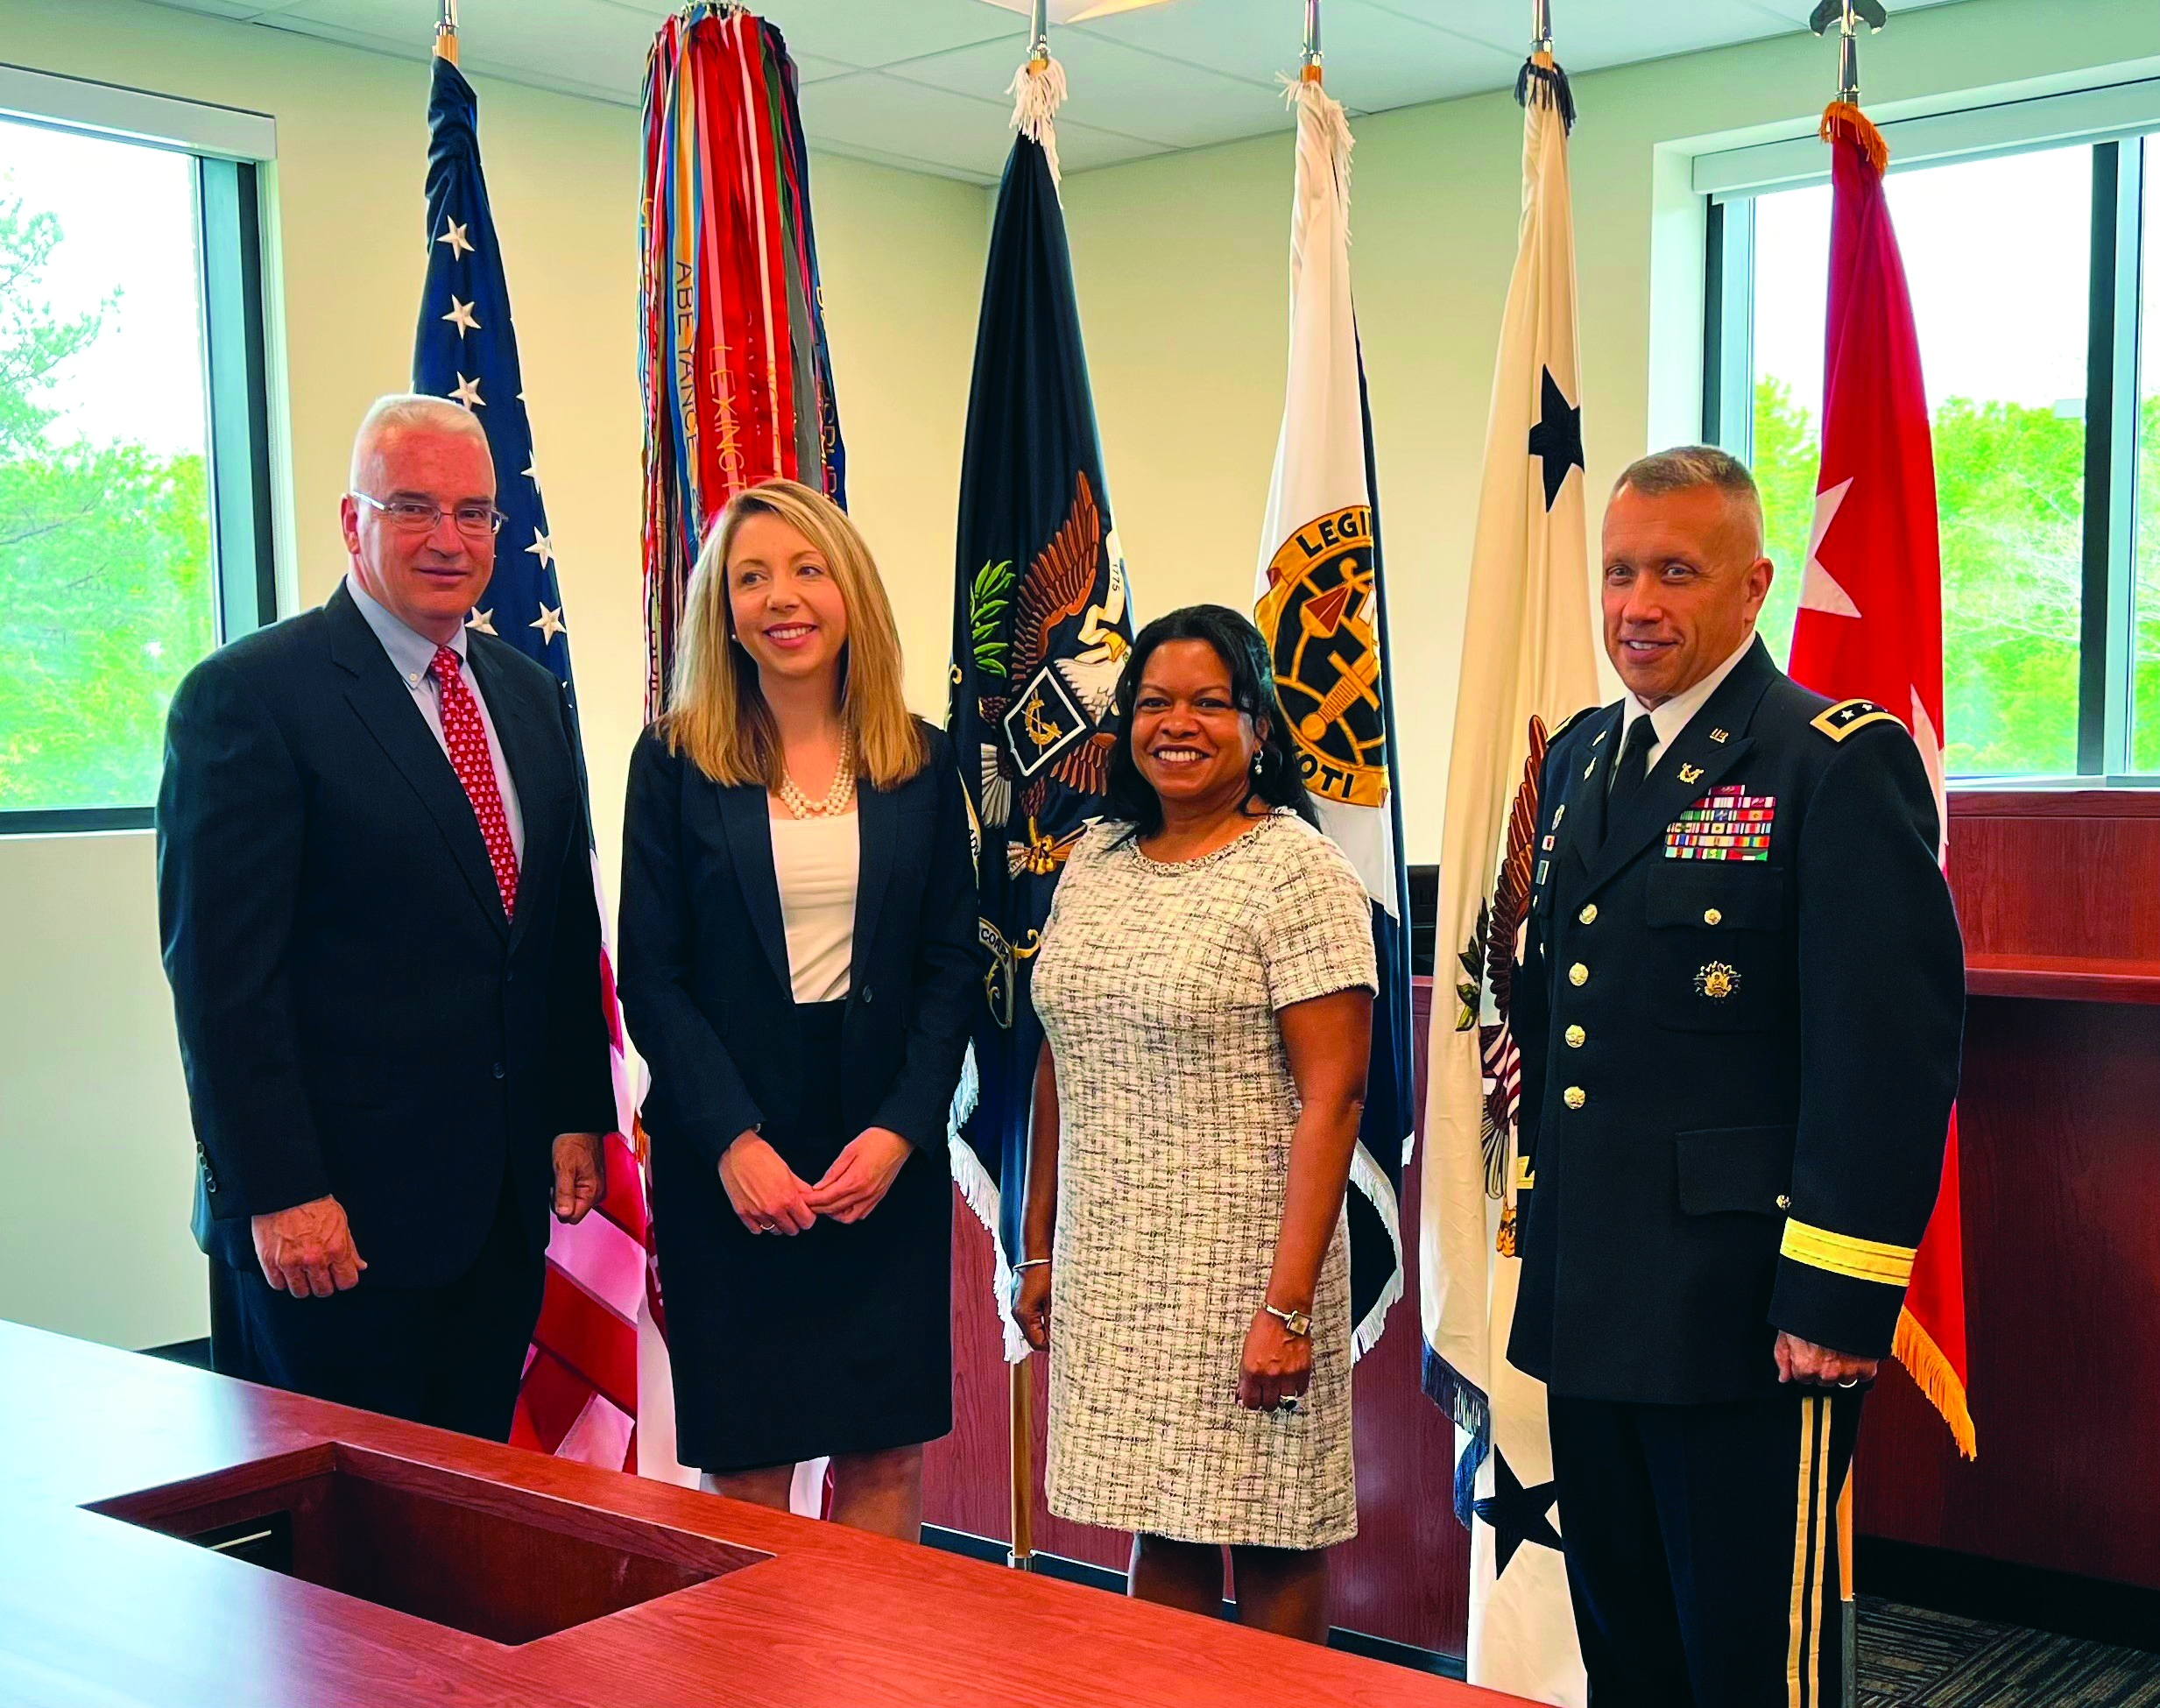 VIPs at the Advocacy Center opening on 5 May. Left
        to right are: Mr. Mike Mulligan, Director, Advocacy
        Center; Ms. Jessica D. Aber, U.S. Attorney for the
        Eastern District of Virginia; Ms. Carrie F. Ricci,
        Department of the Army General Counsel; Lieutenant
        General Stuart W. Risch, The Judge Advocate General.